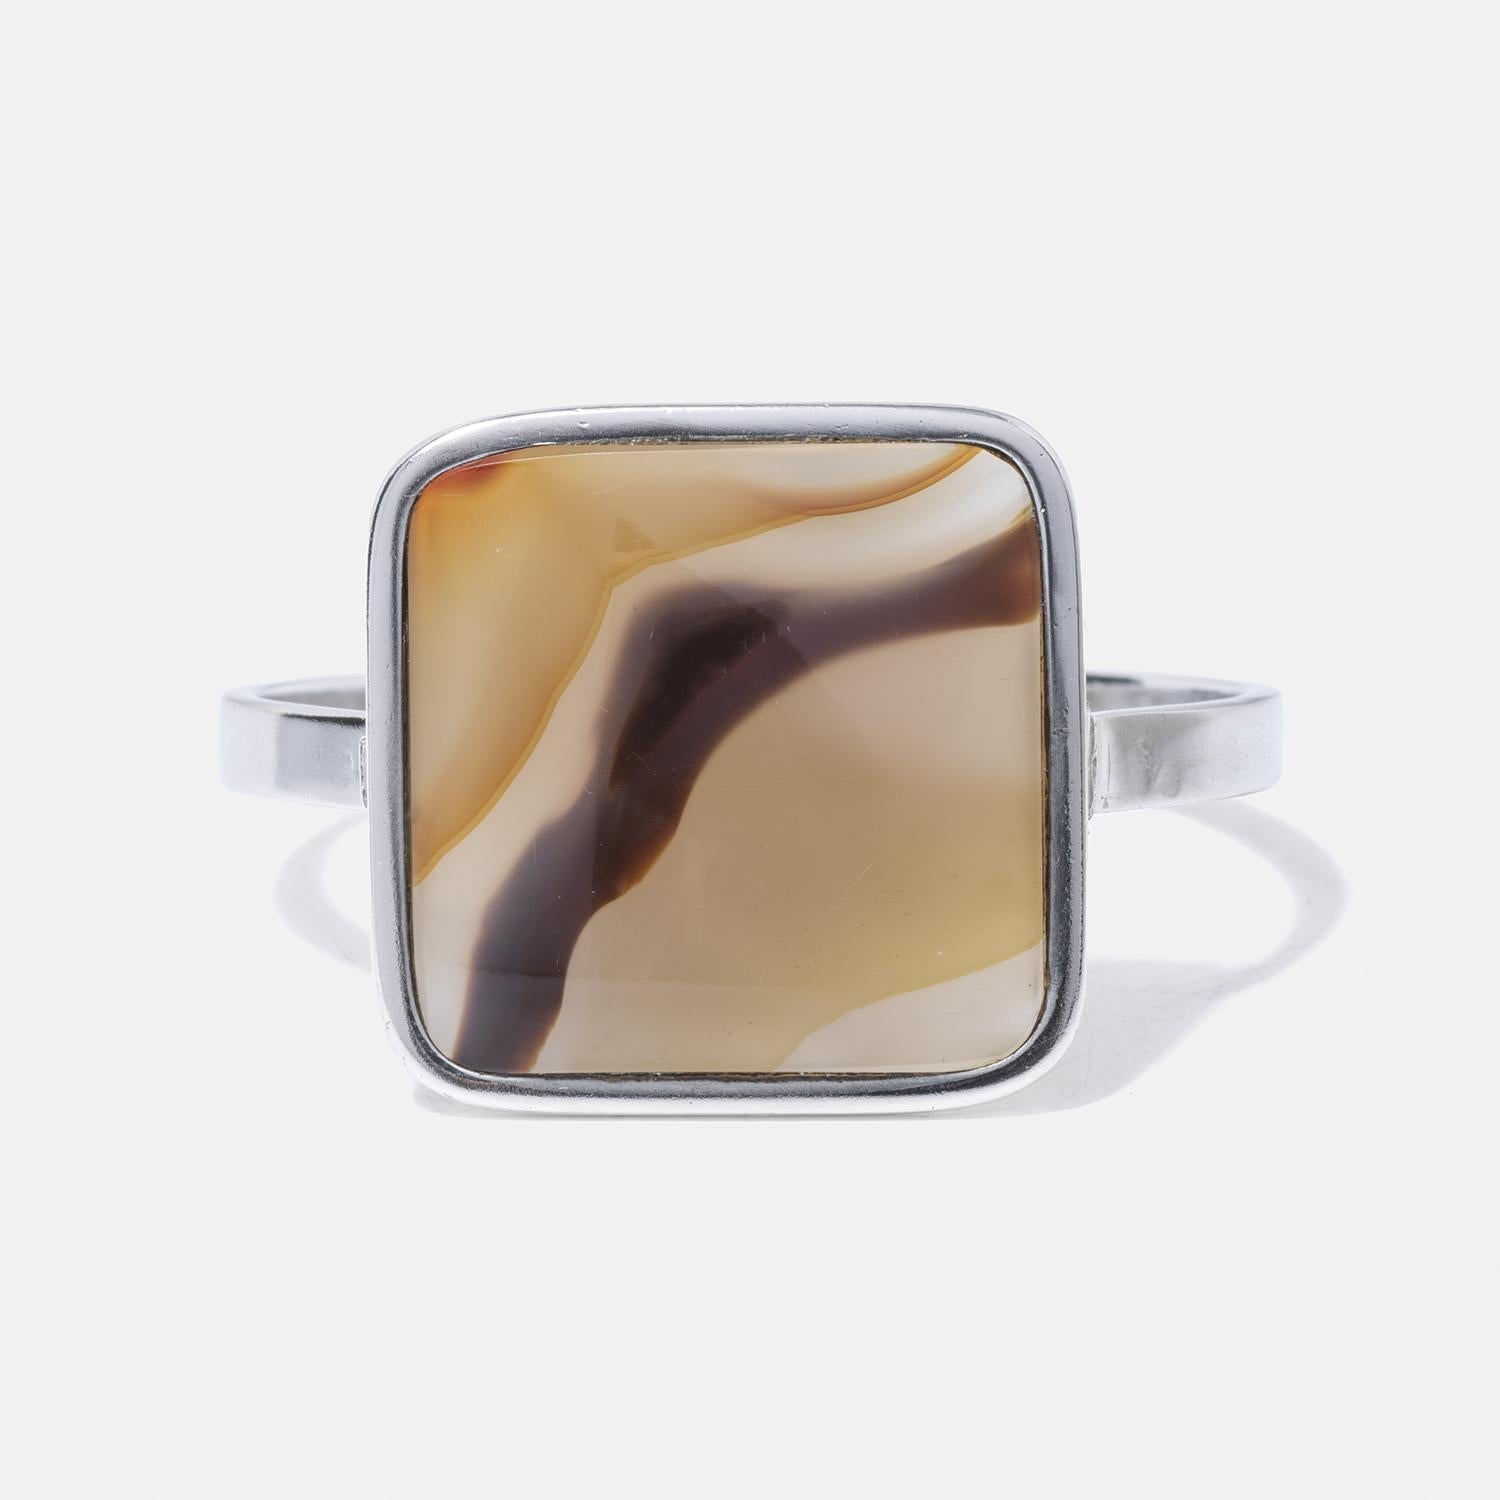 This elegant bracelet features a square tiger eye stone set in sterling silver, showcasing the stone's mesmerizing shades of golden brown, beige and dark rich stripes that change with the light. The band is beautifully thin, emphasizing the stone's